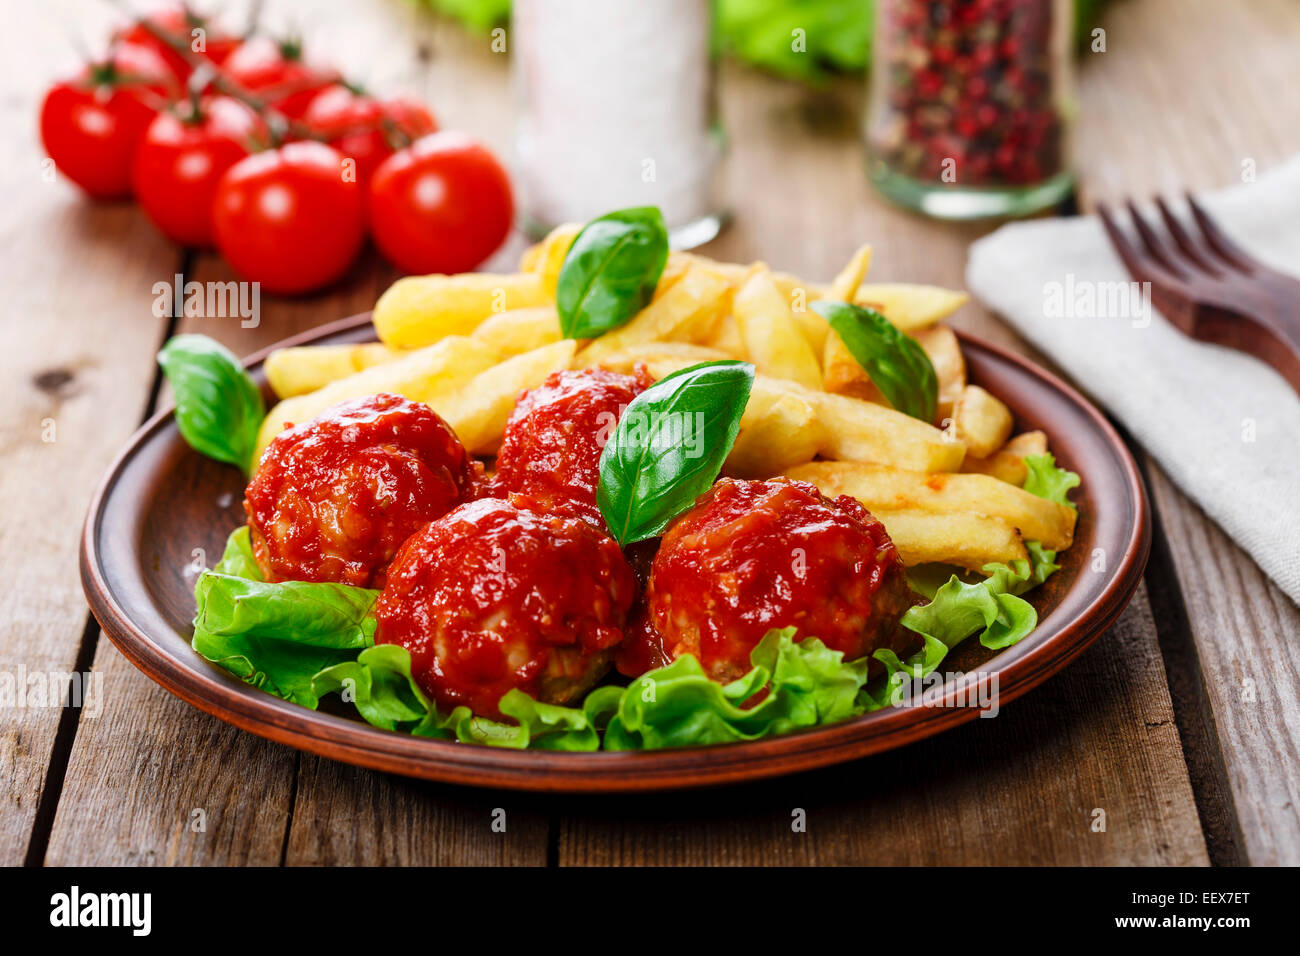 meatballs in tomato sauce with french fries Stock Photo